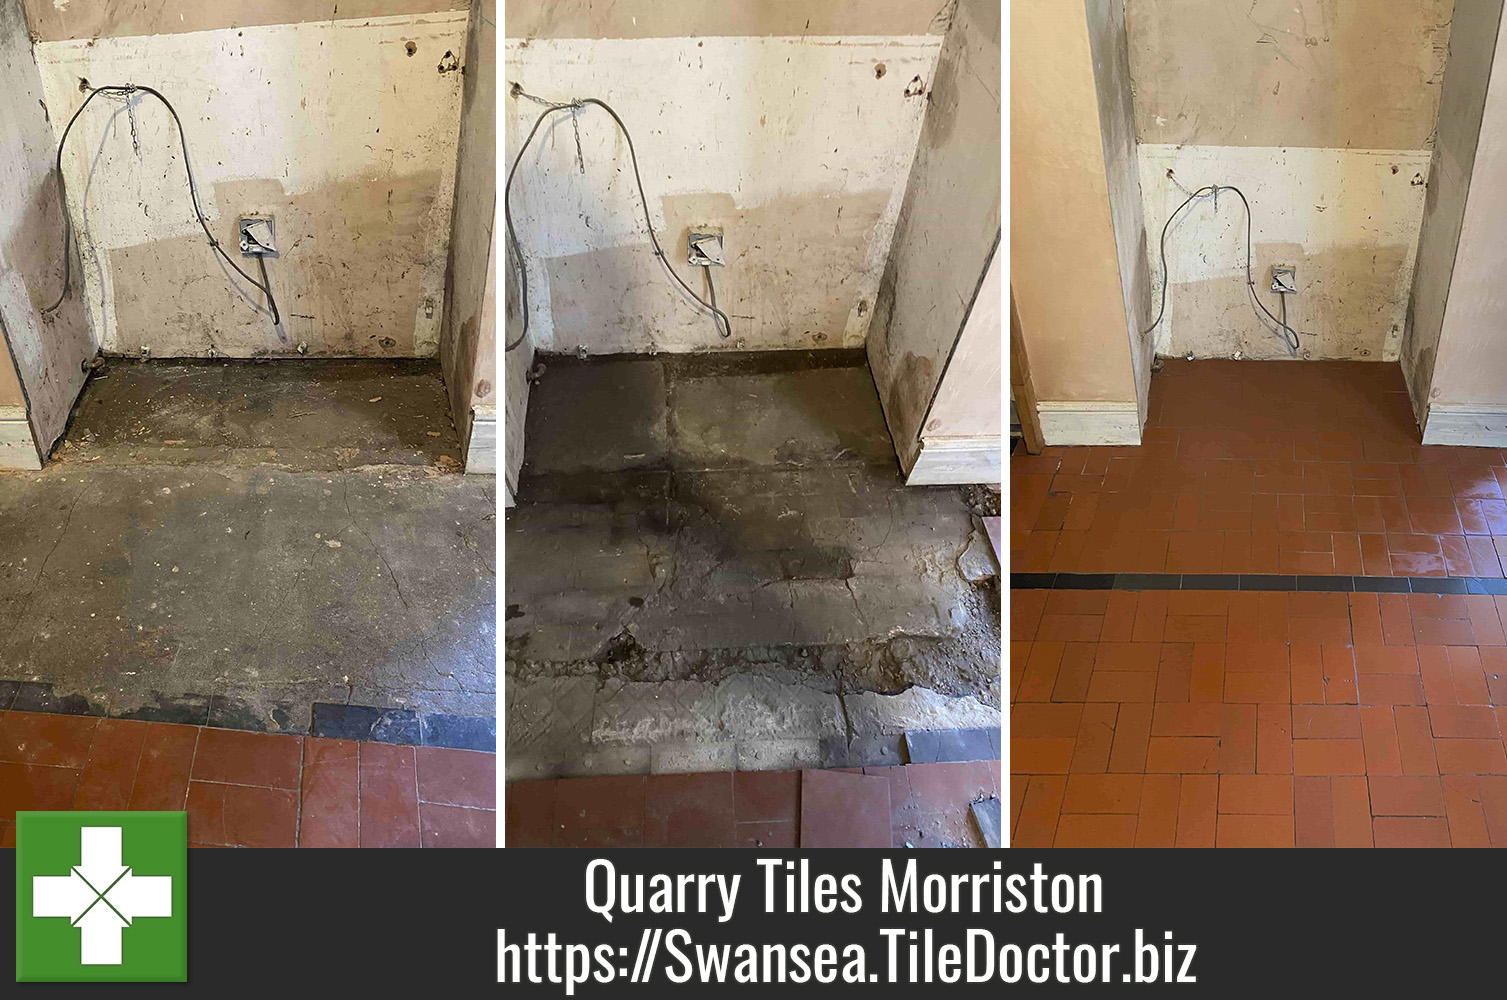 Removing Paint from Quarry Tiles in Swansea with Tile Doctor Remove and Go